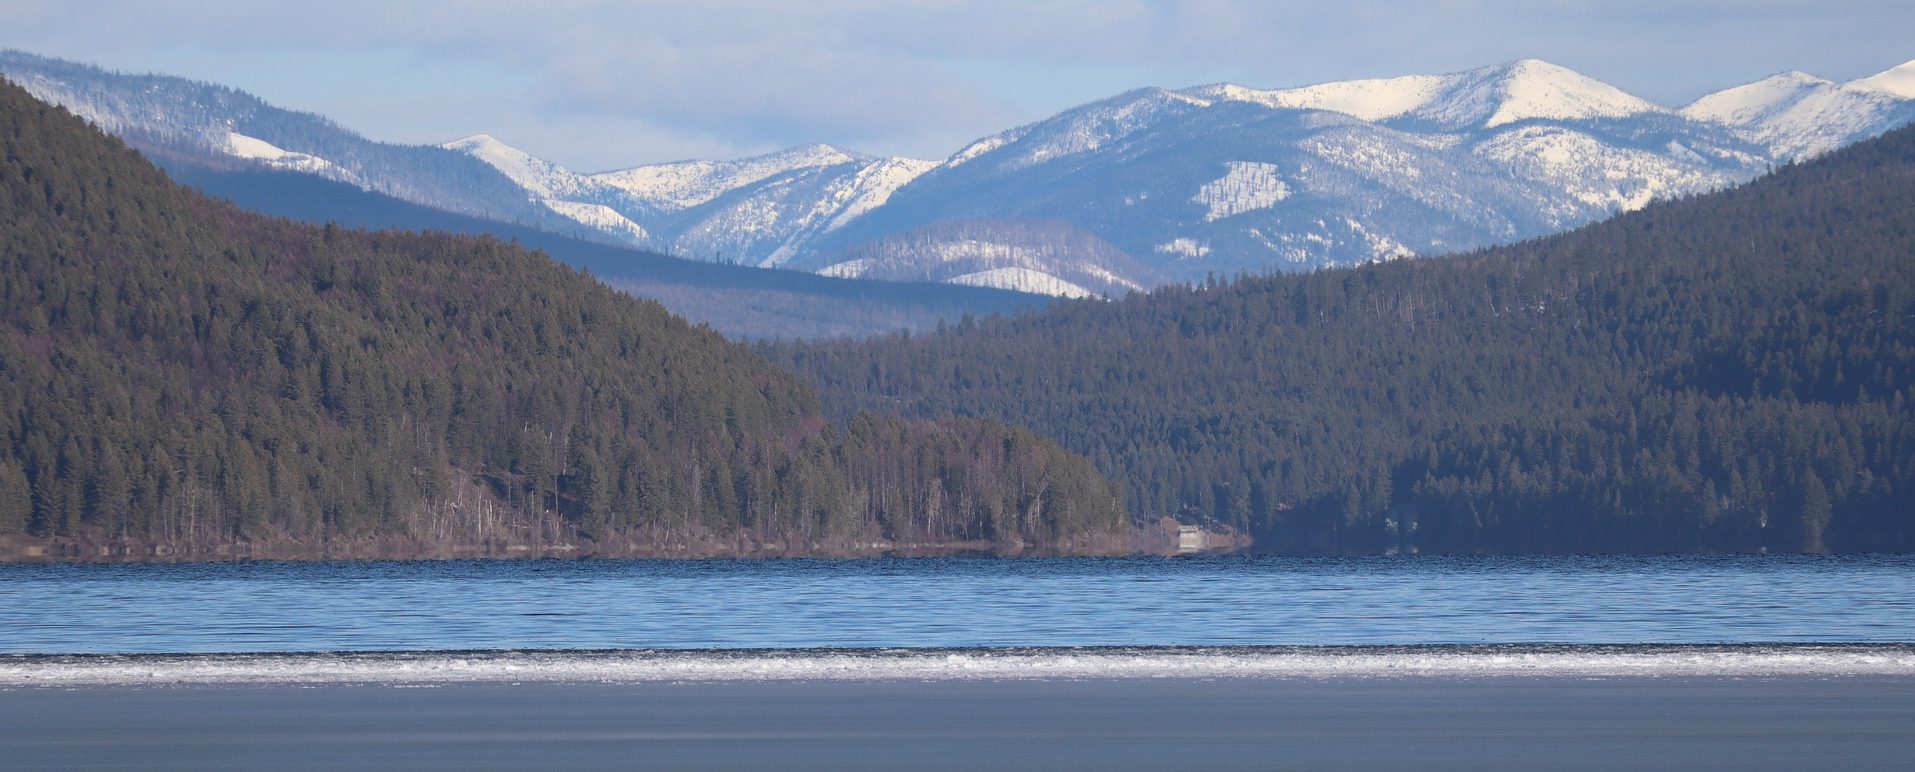 View over Whitefish Lake, available to visit on your Whitefish, Montana vacation.